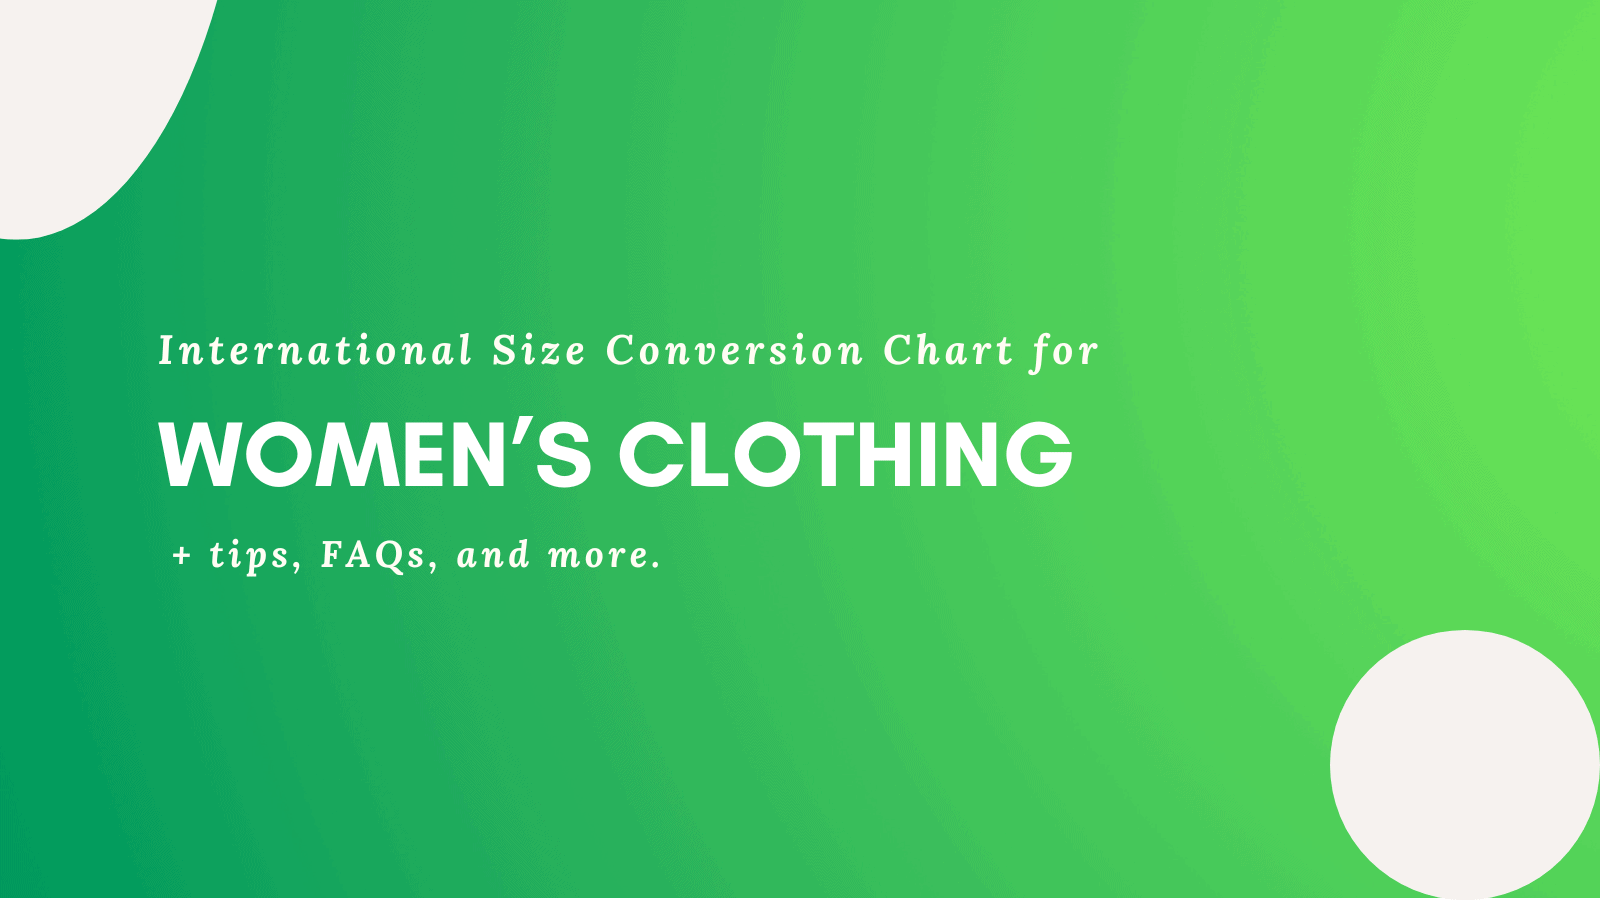 https://kiwisizing.com/wp-content/uploads/2023/01/Size-Conversion-Chart-for-Womens-Clothing.png